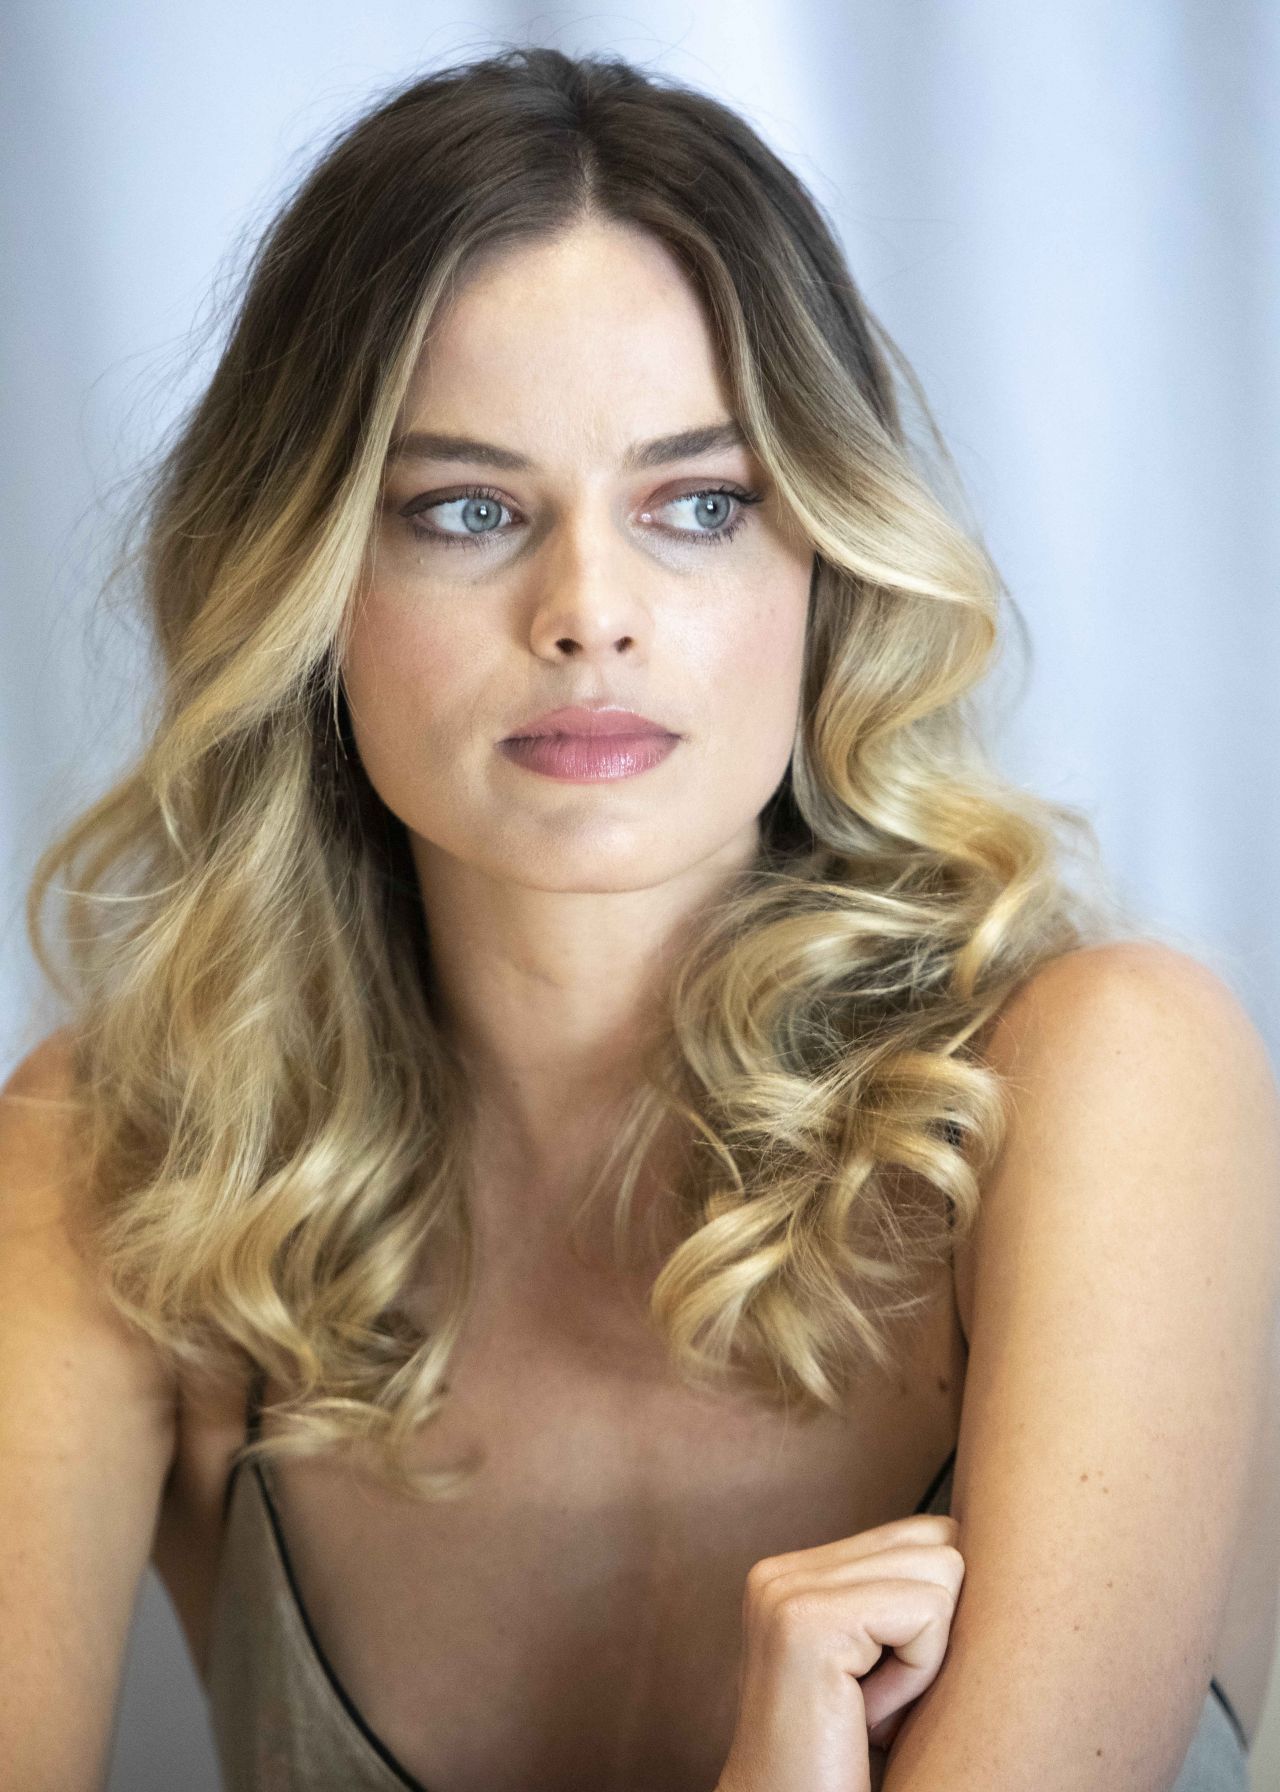 https://celebmafia.com/wp-content/uploads/2019/07/margot-robbie-once-upon-a-time-in-hollywood-press-conference-in-beverly-hills-2.jpg